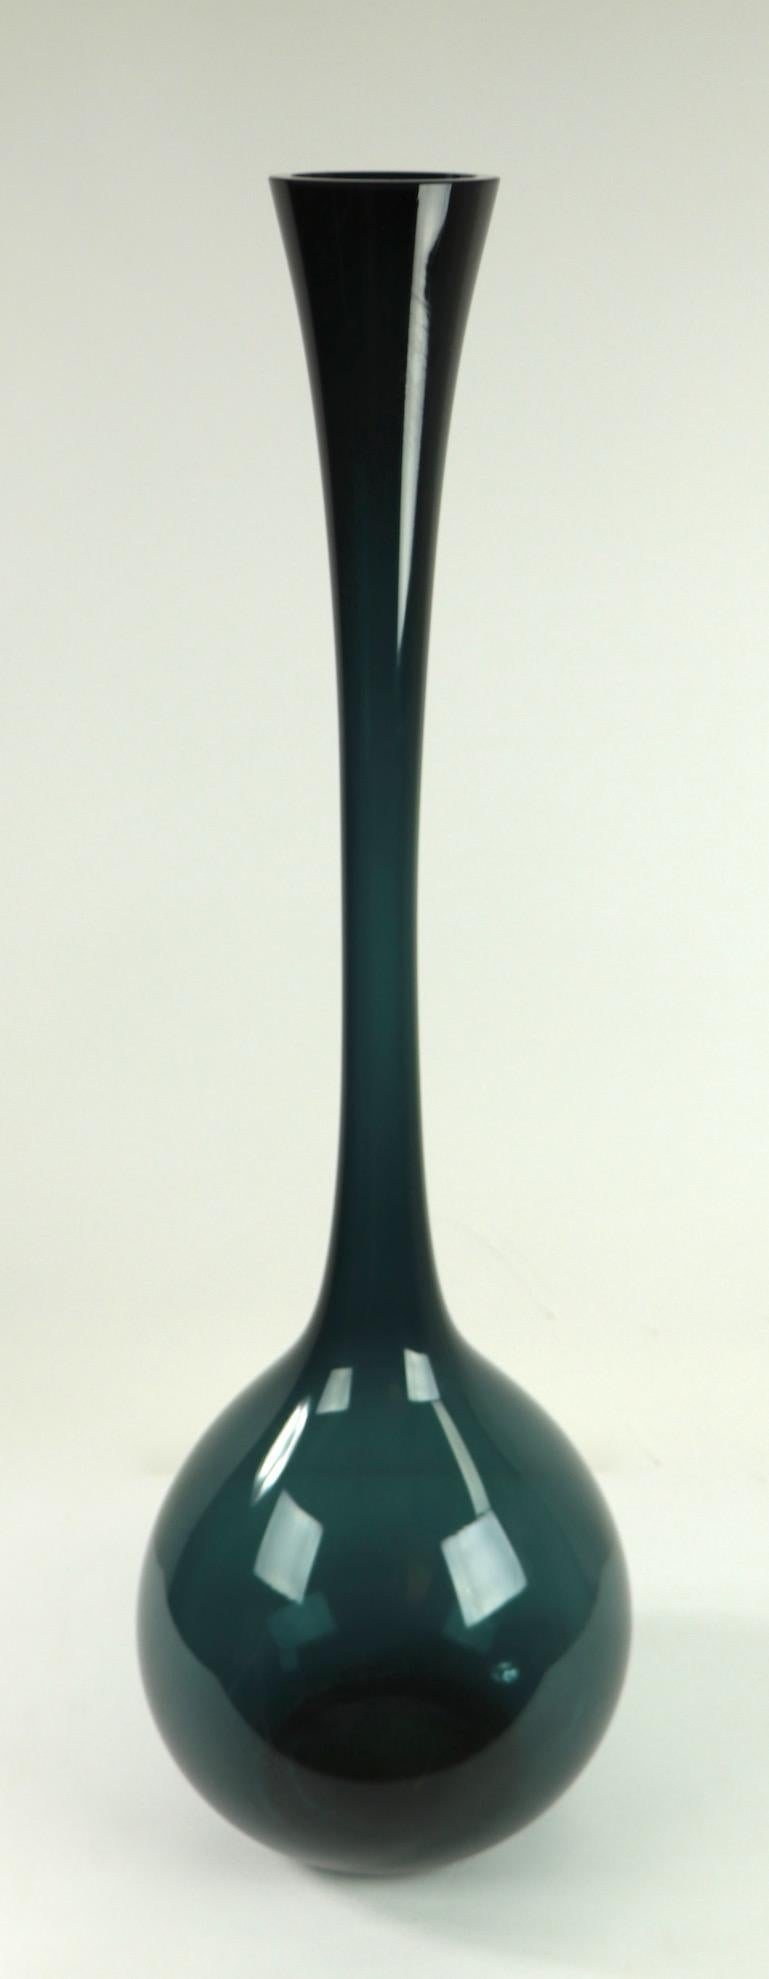 Elegant elongated midcentury art glass vase having a tall trumpet form neck, and bulbous base. Probably Blenko or possibly Italian or Swedish production. Incredible scale, intriguing color and great condition.